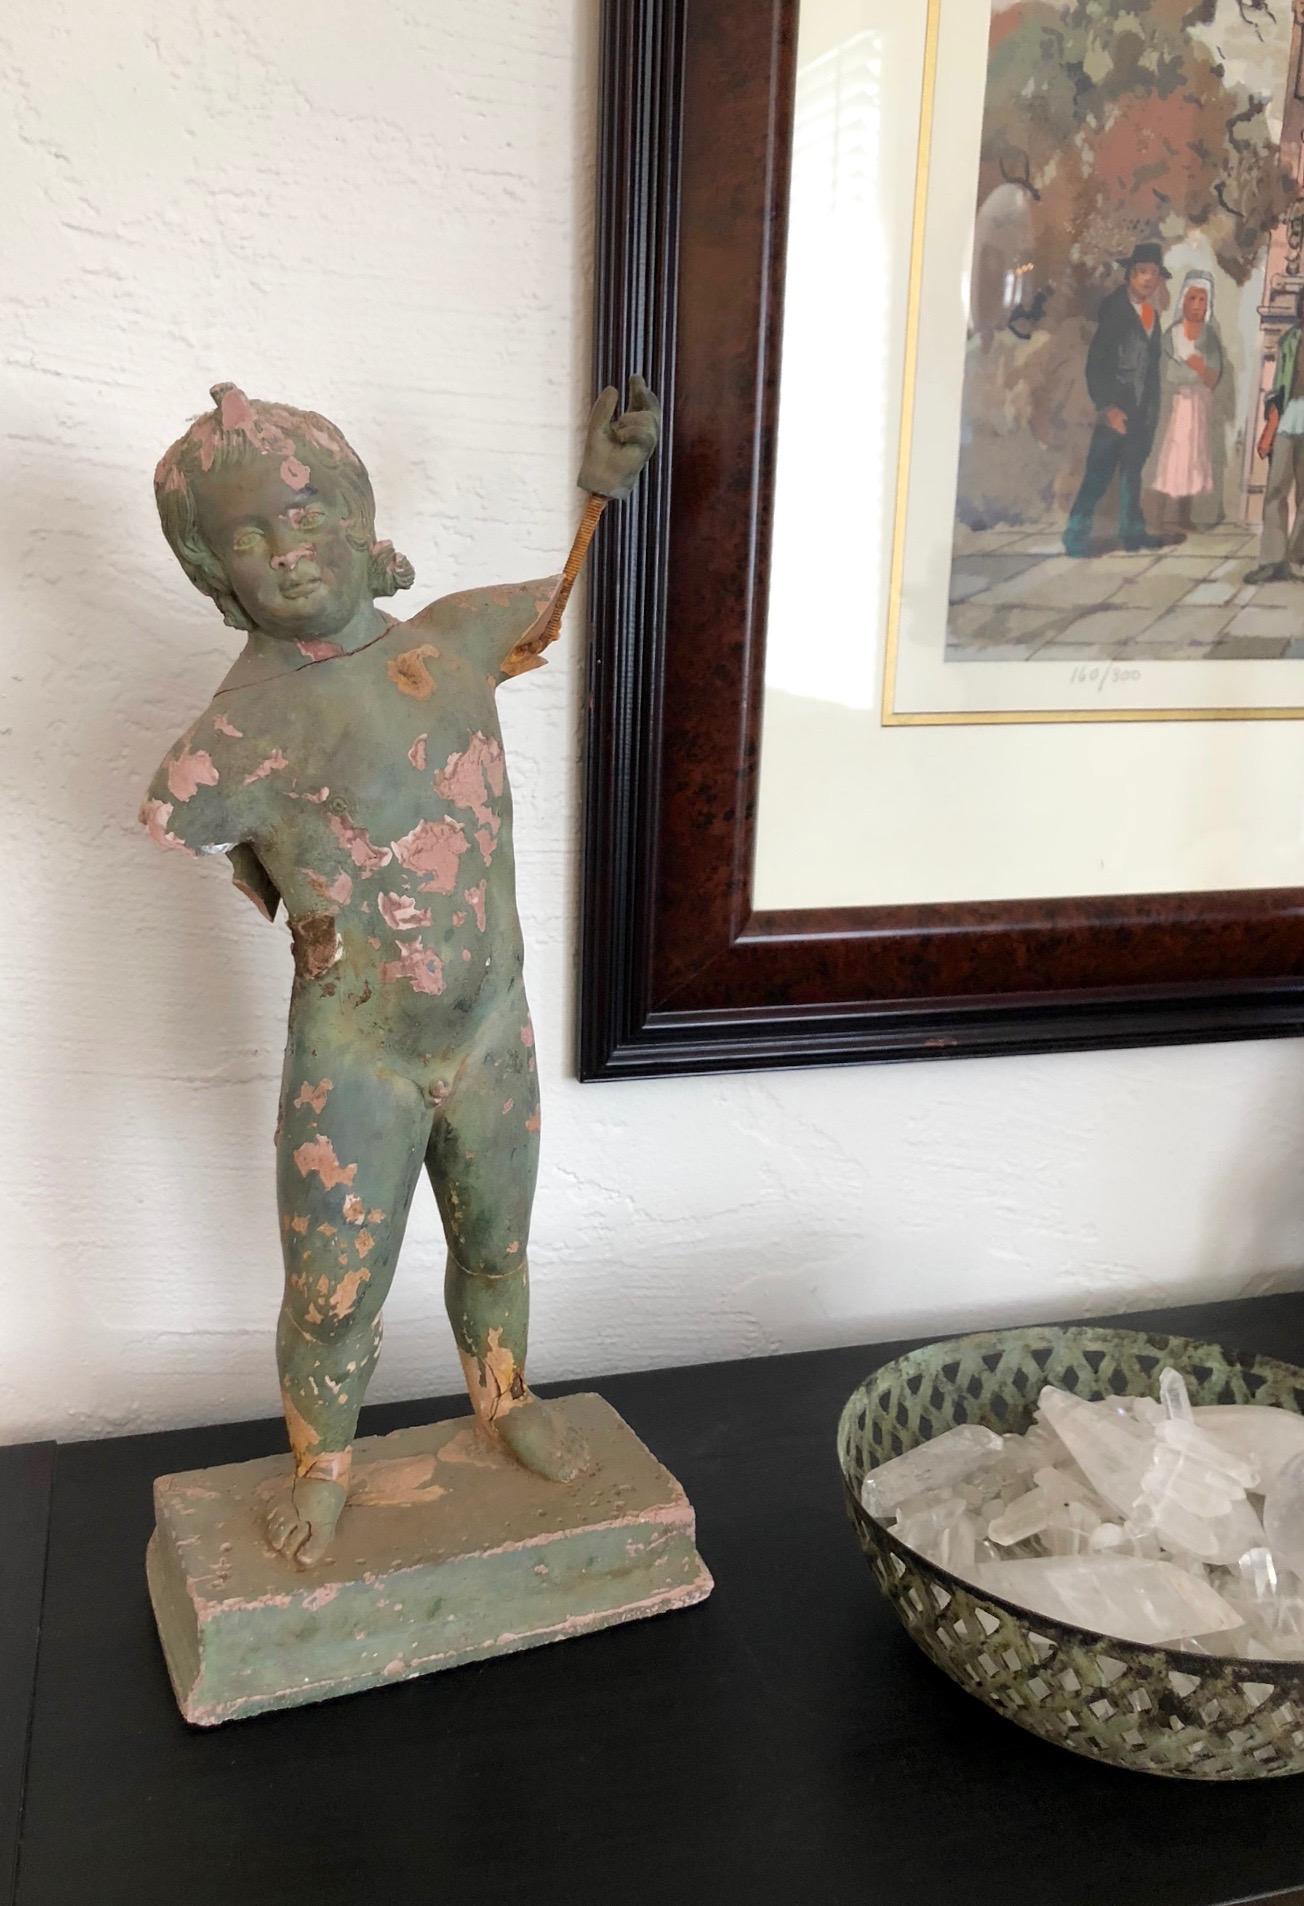 19th century Italian putti on Base. Very damaged but beautiful as an antique decorative fragment. Made of Terracotta.